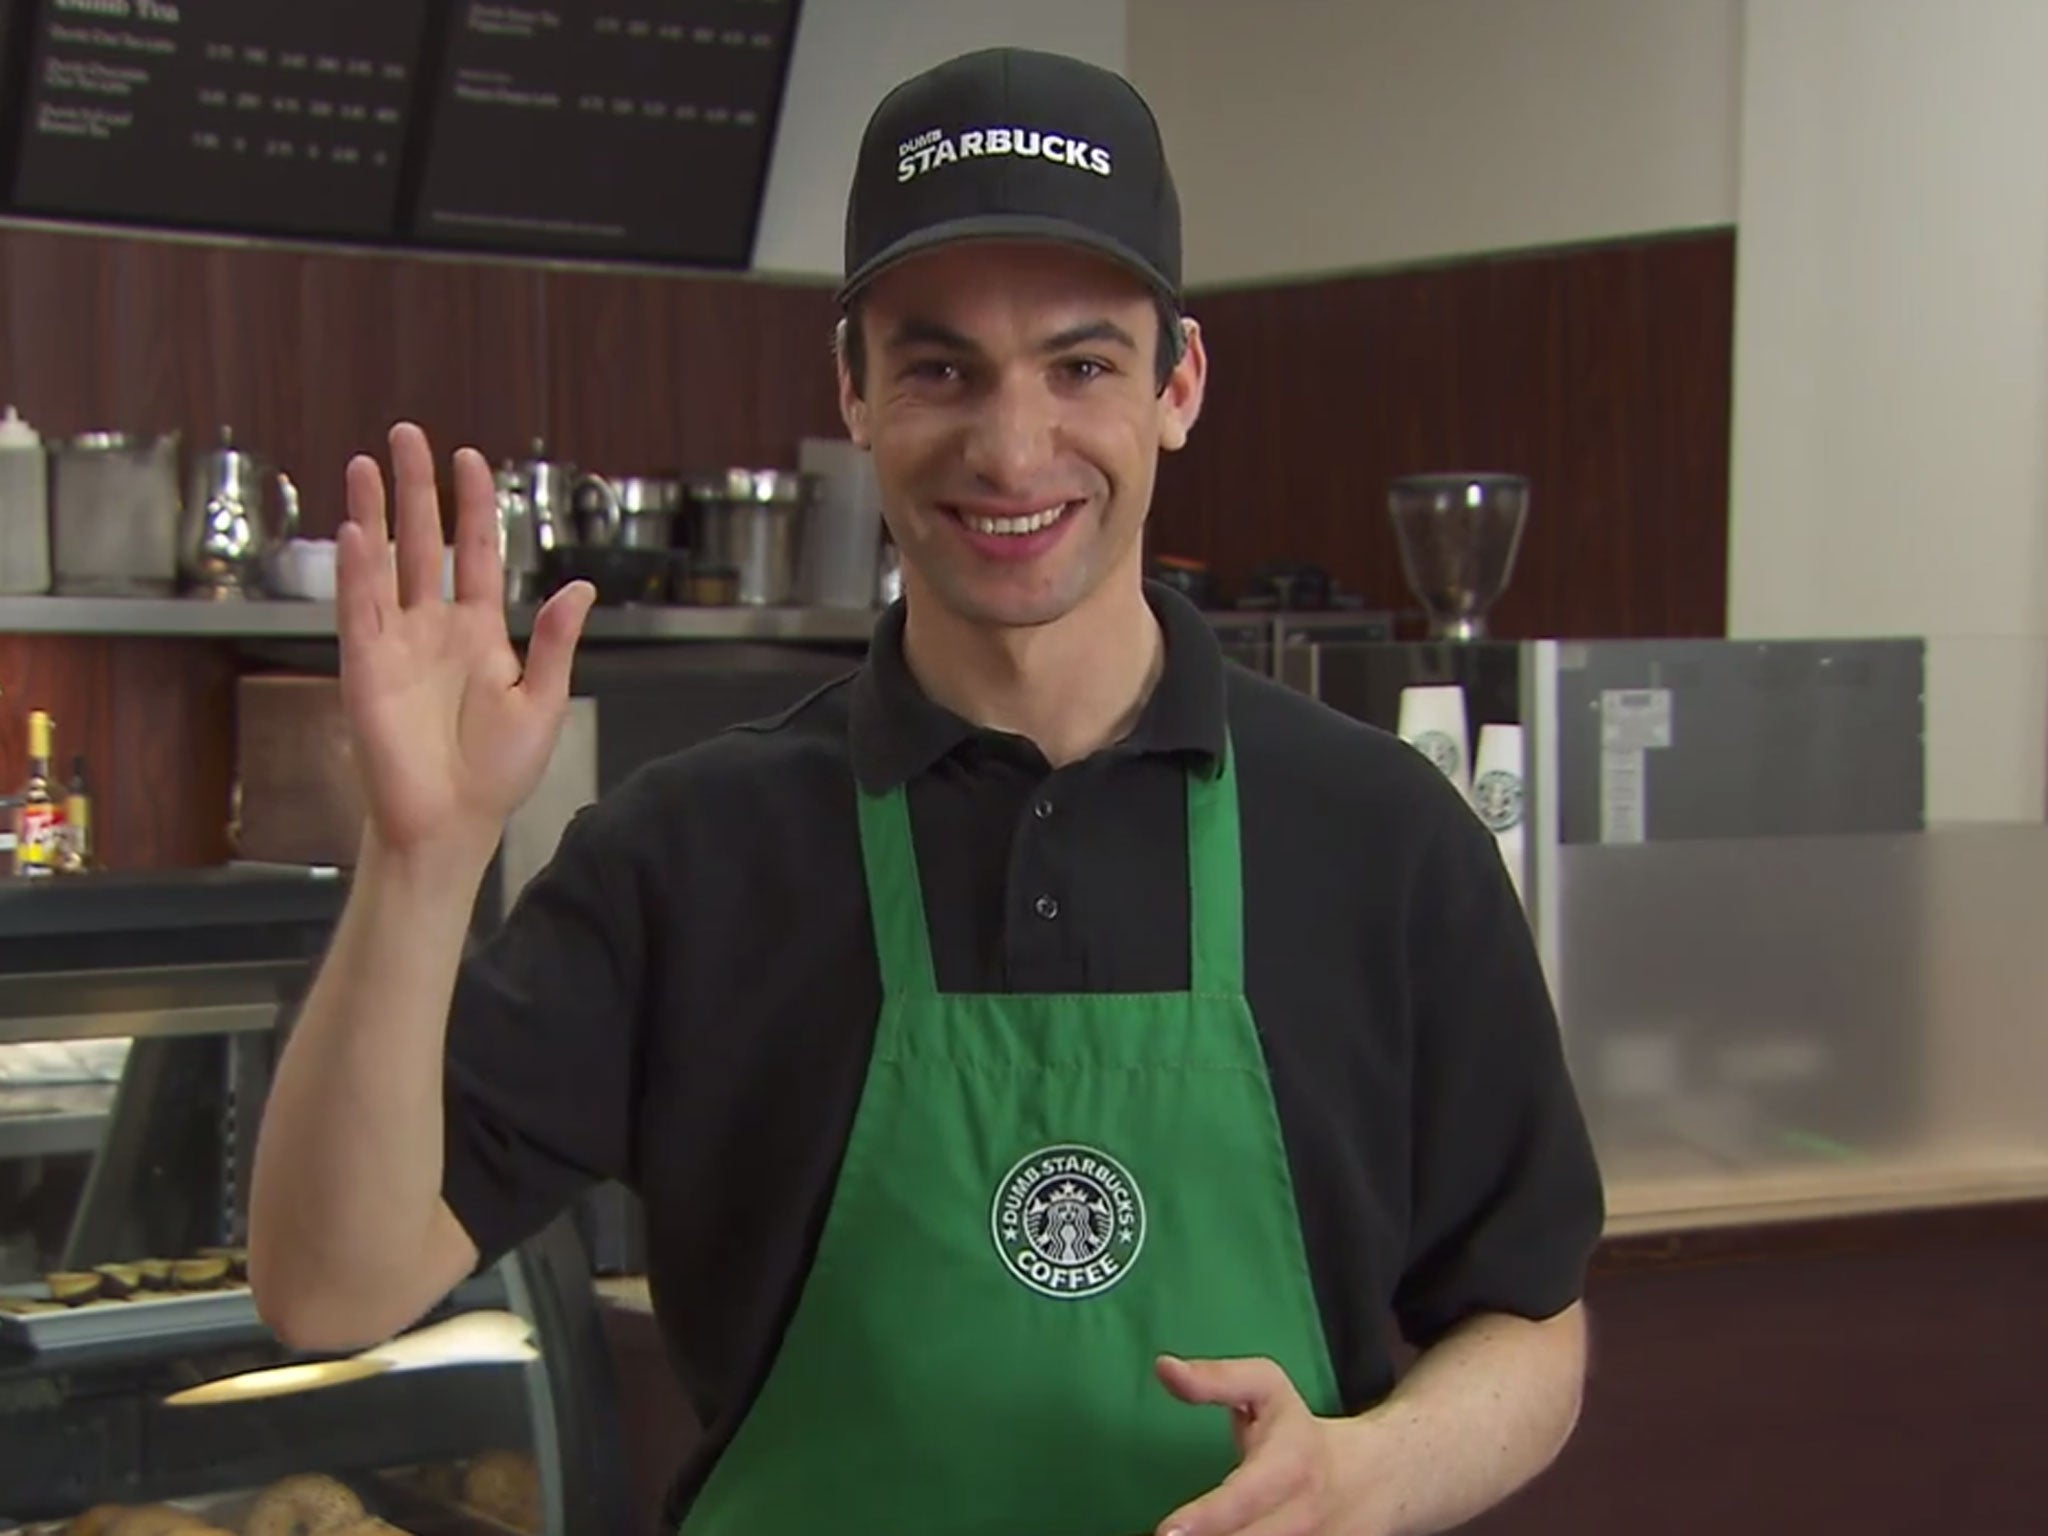 dumb-starbucks-mystery-owner-unmasked-and-shut-down-comedy-central